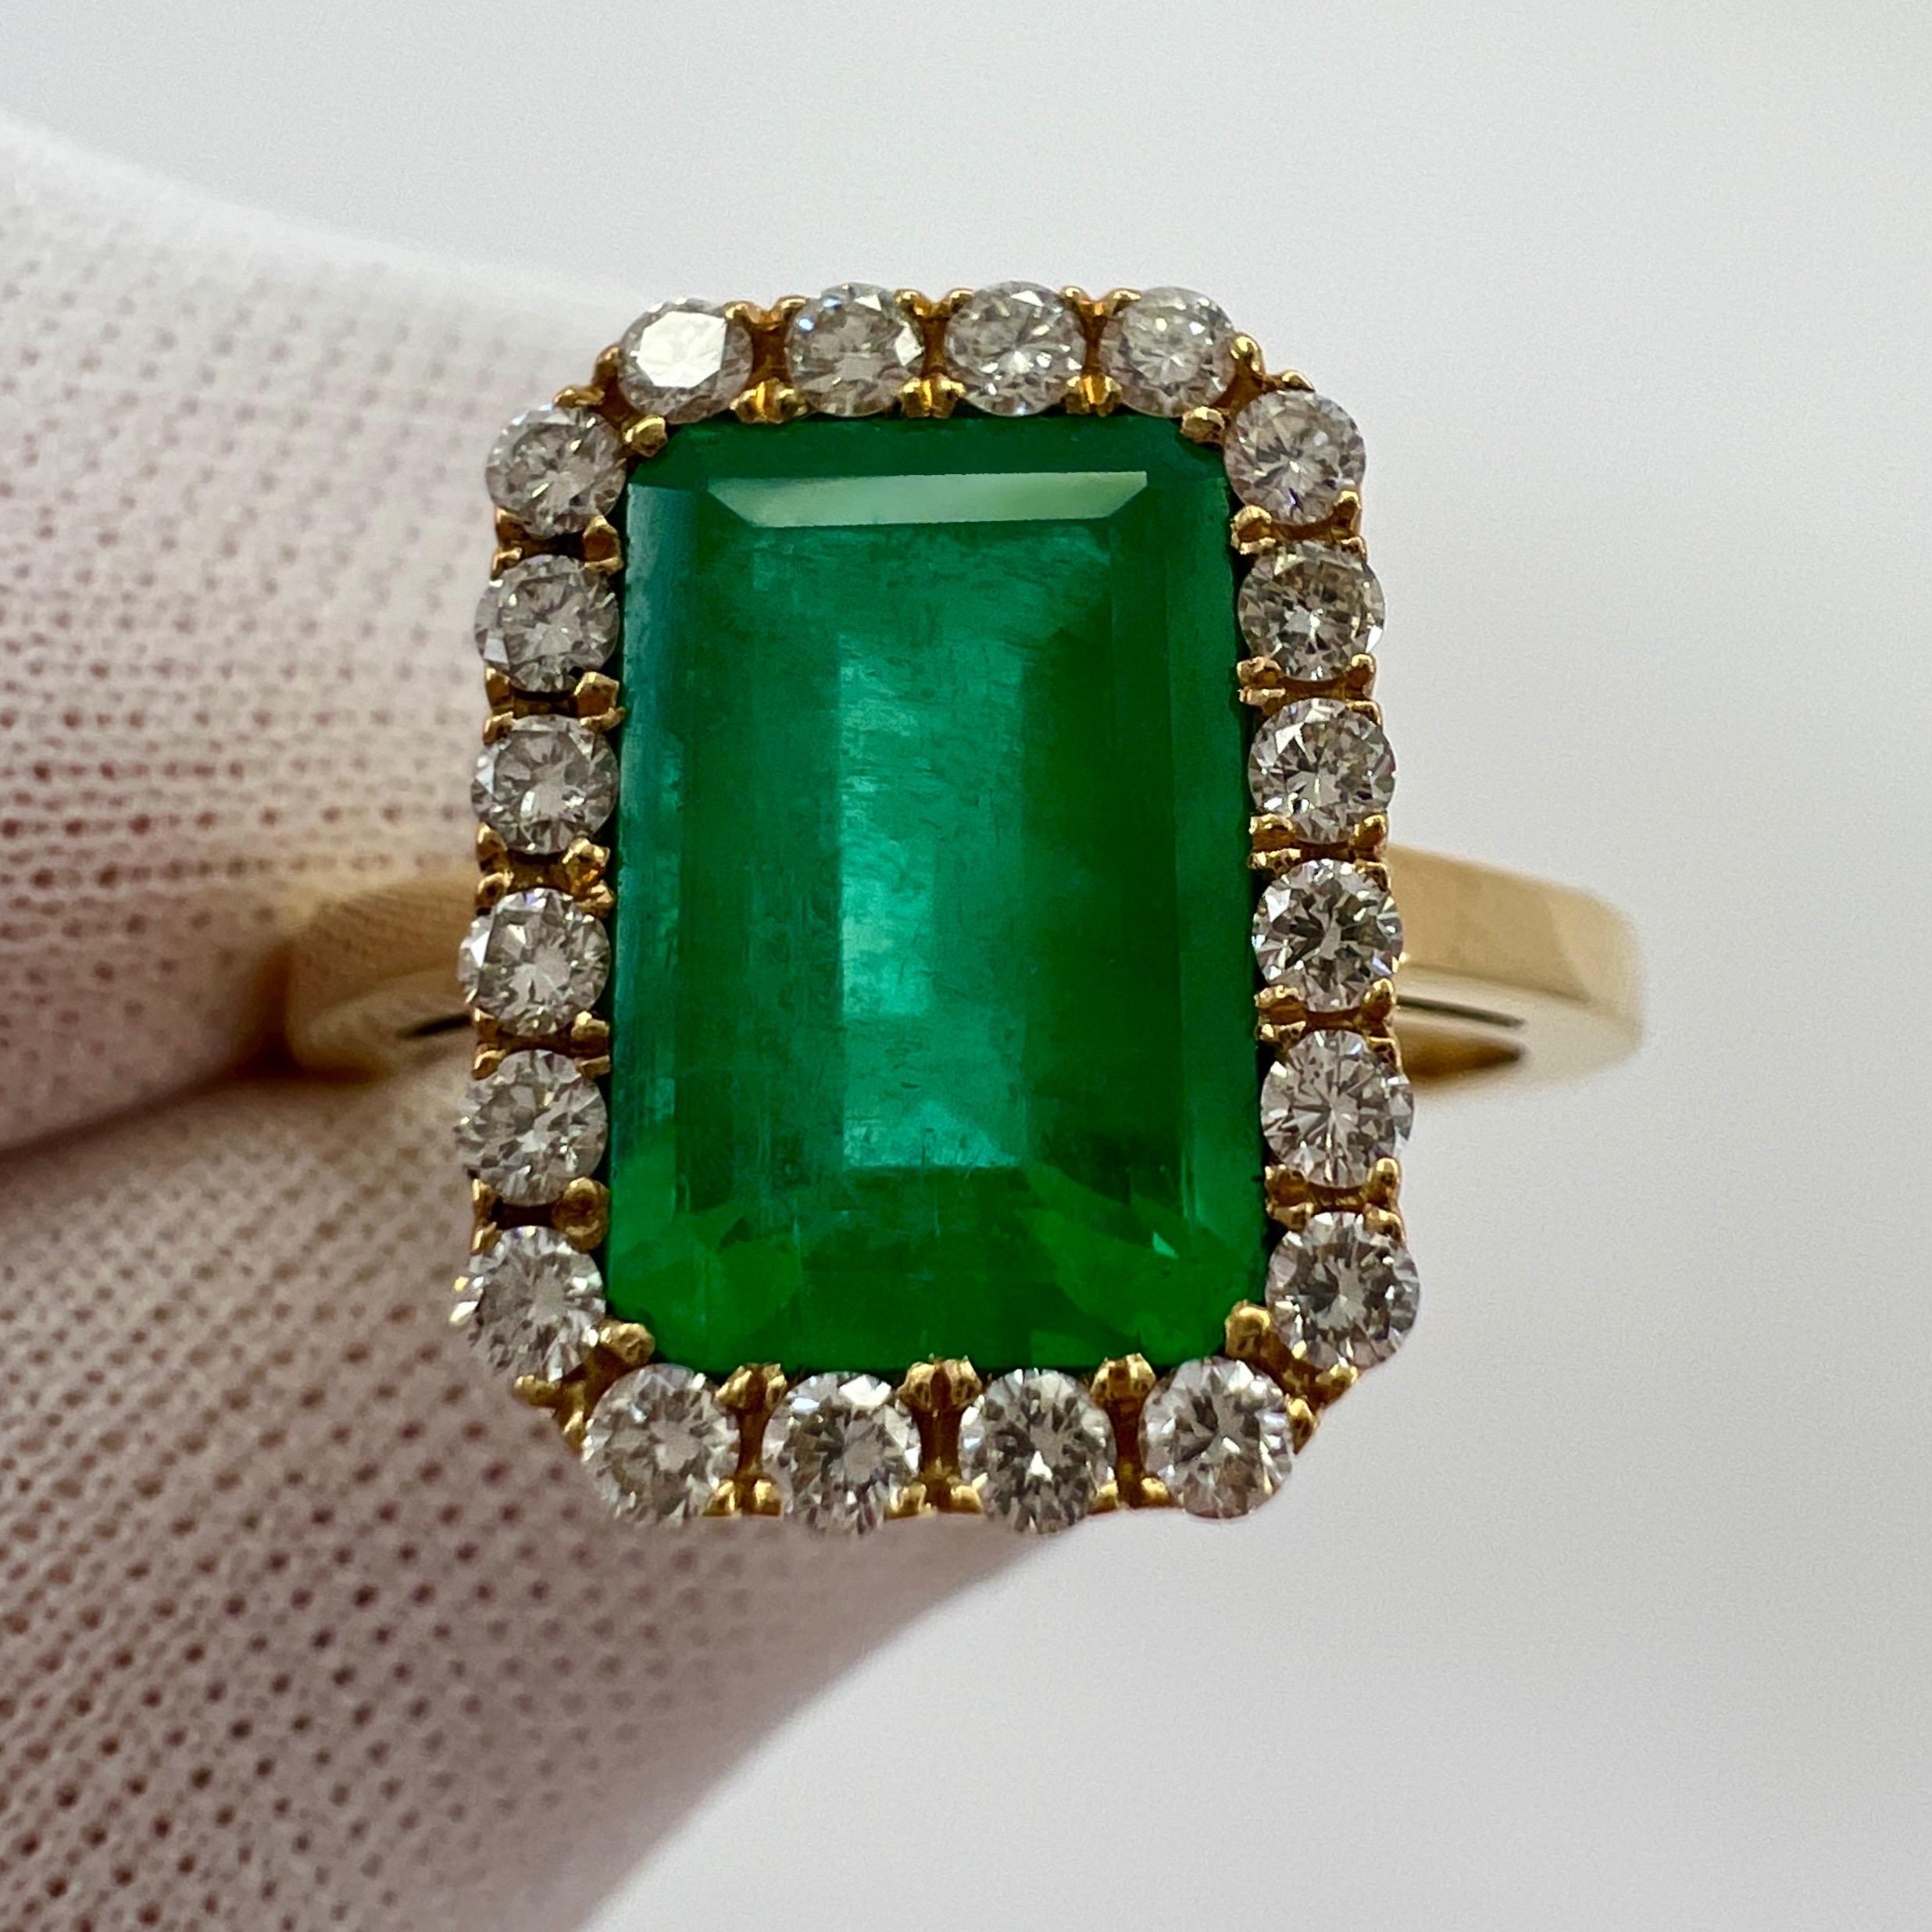 Fine GIA Certified Vivid Green Colombian Emerald & Diamond 18k Yellow Gold Halo Ring. 3.06 Total Carat Weight.

Large 2.72 carat emerald with a stunning intense vivid green colour and very good clarity.

This stone has some small natural inclusions